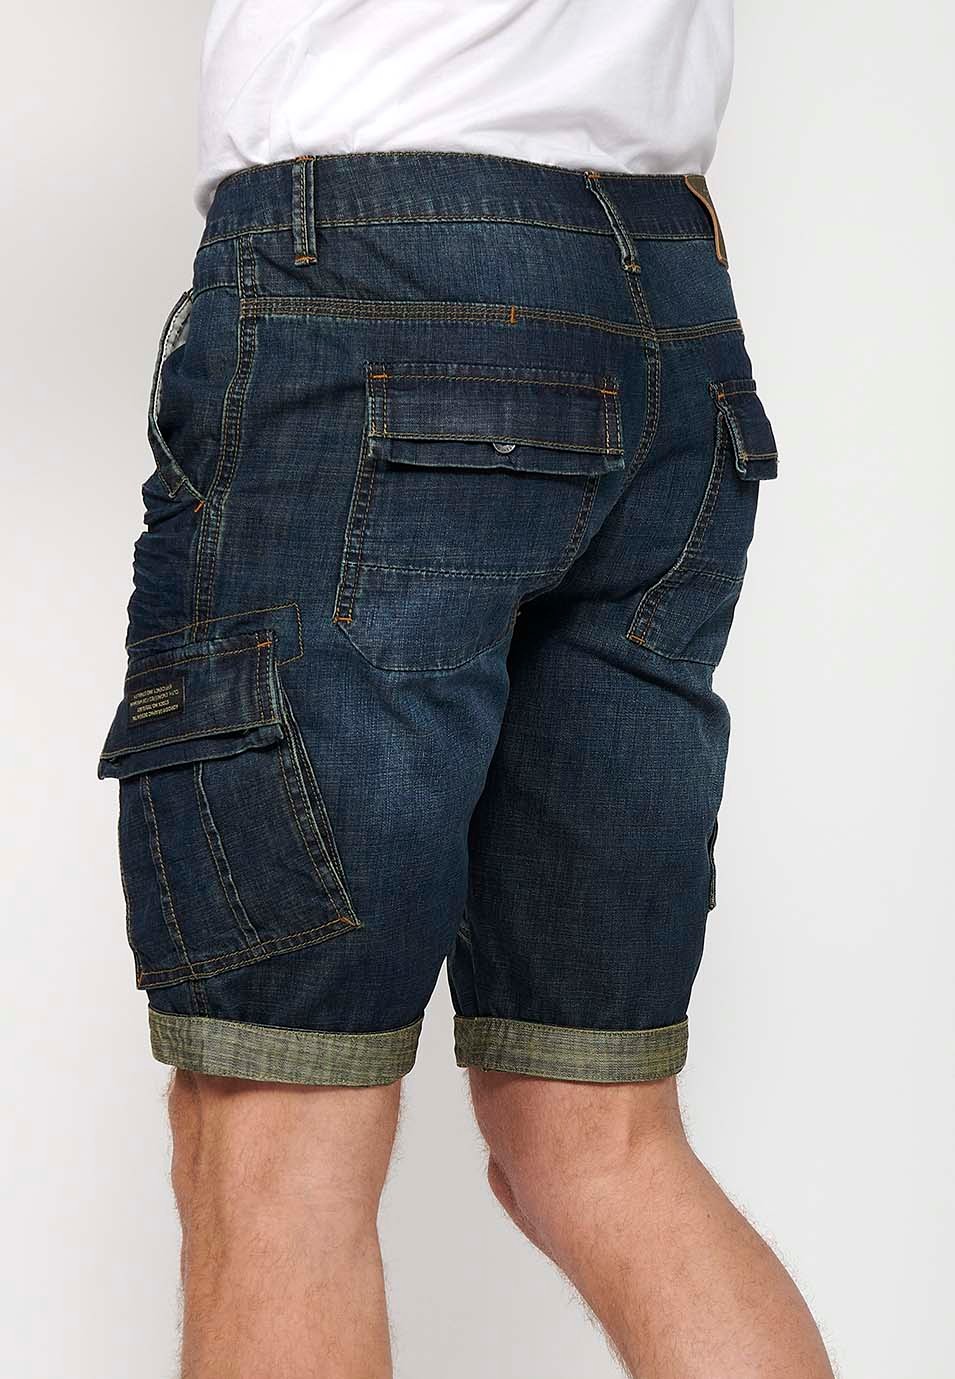 Blue Denim Bermuda Shorts with Side Cargo Pockets and Front Closure with Zipper and Button for Men 9